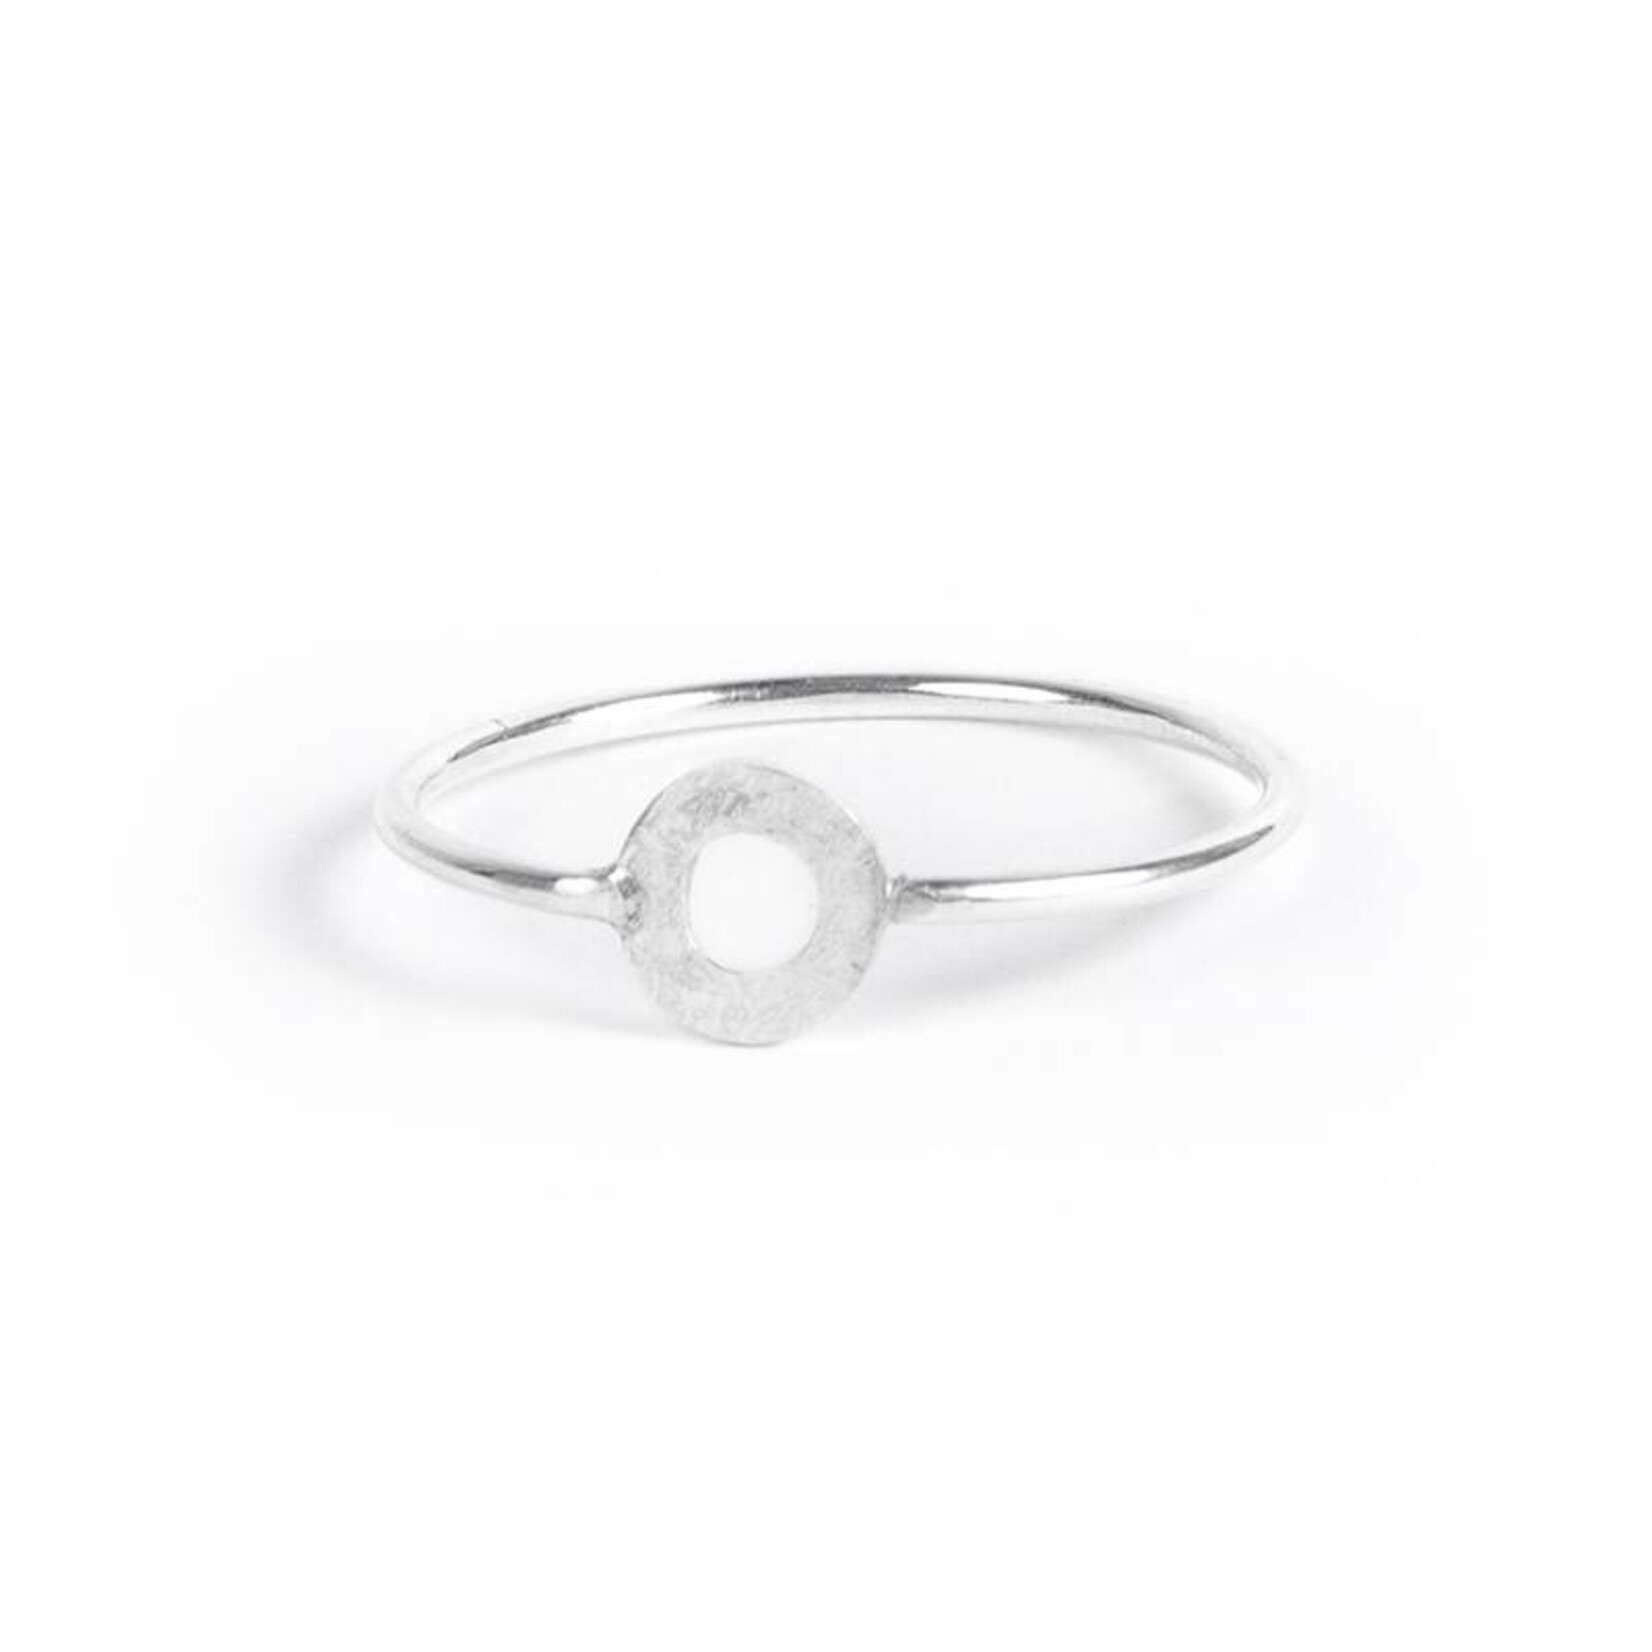 charlotte wooning ring celebration ancient round - zilver